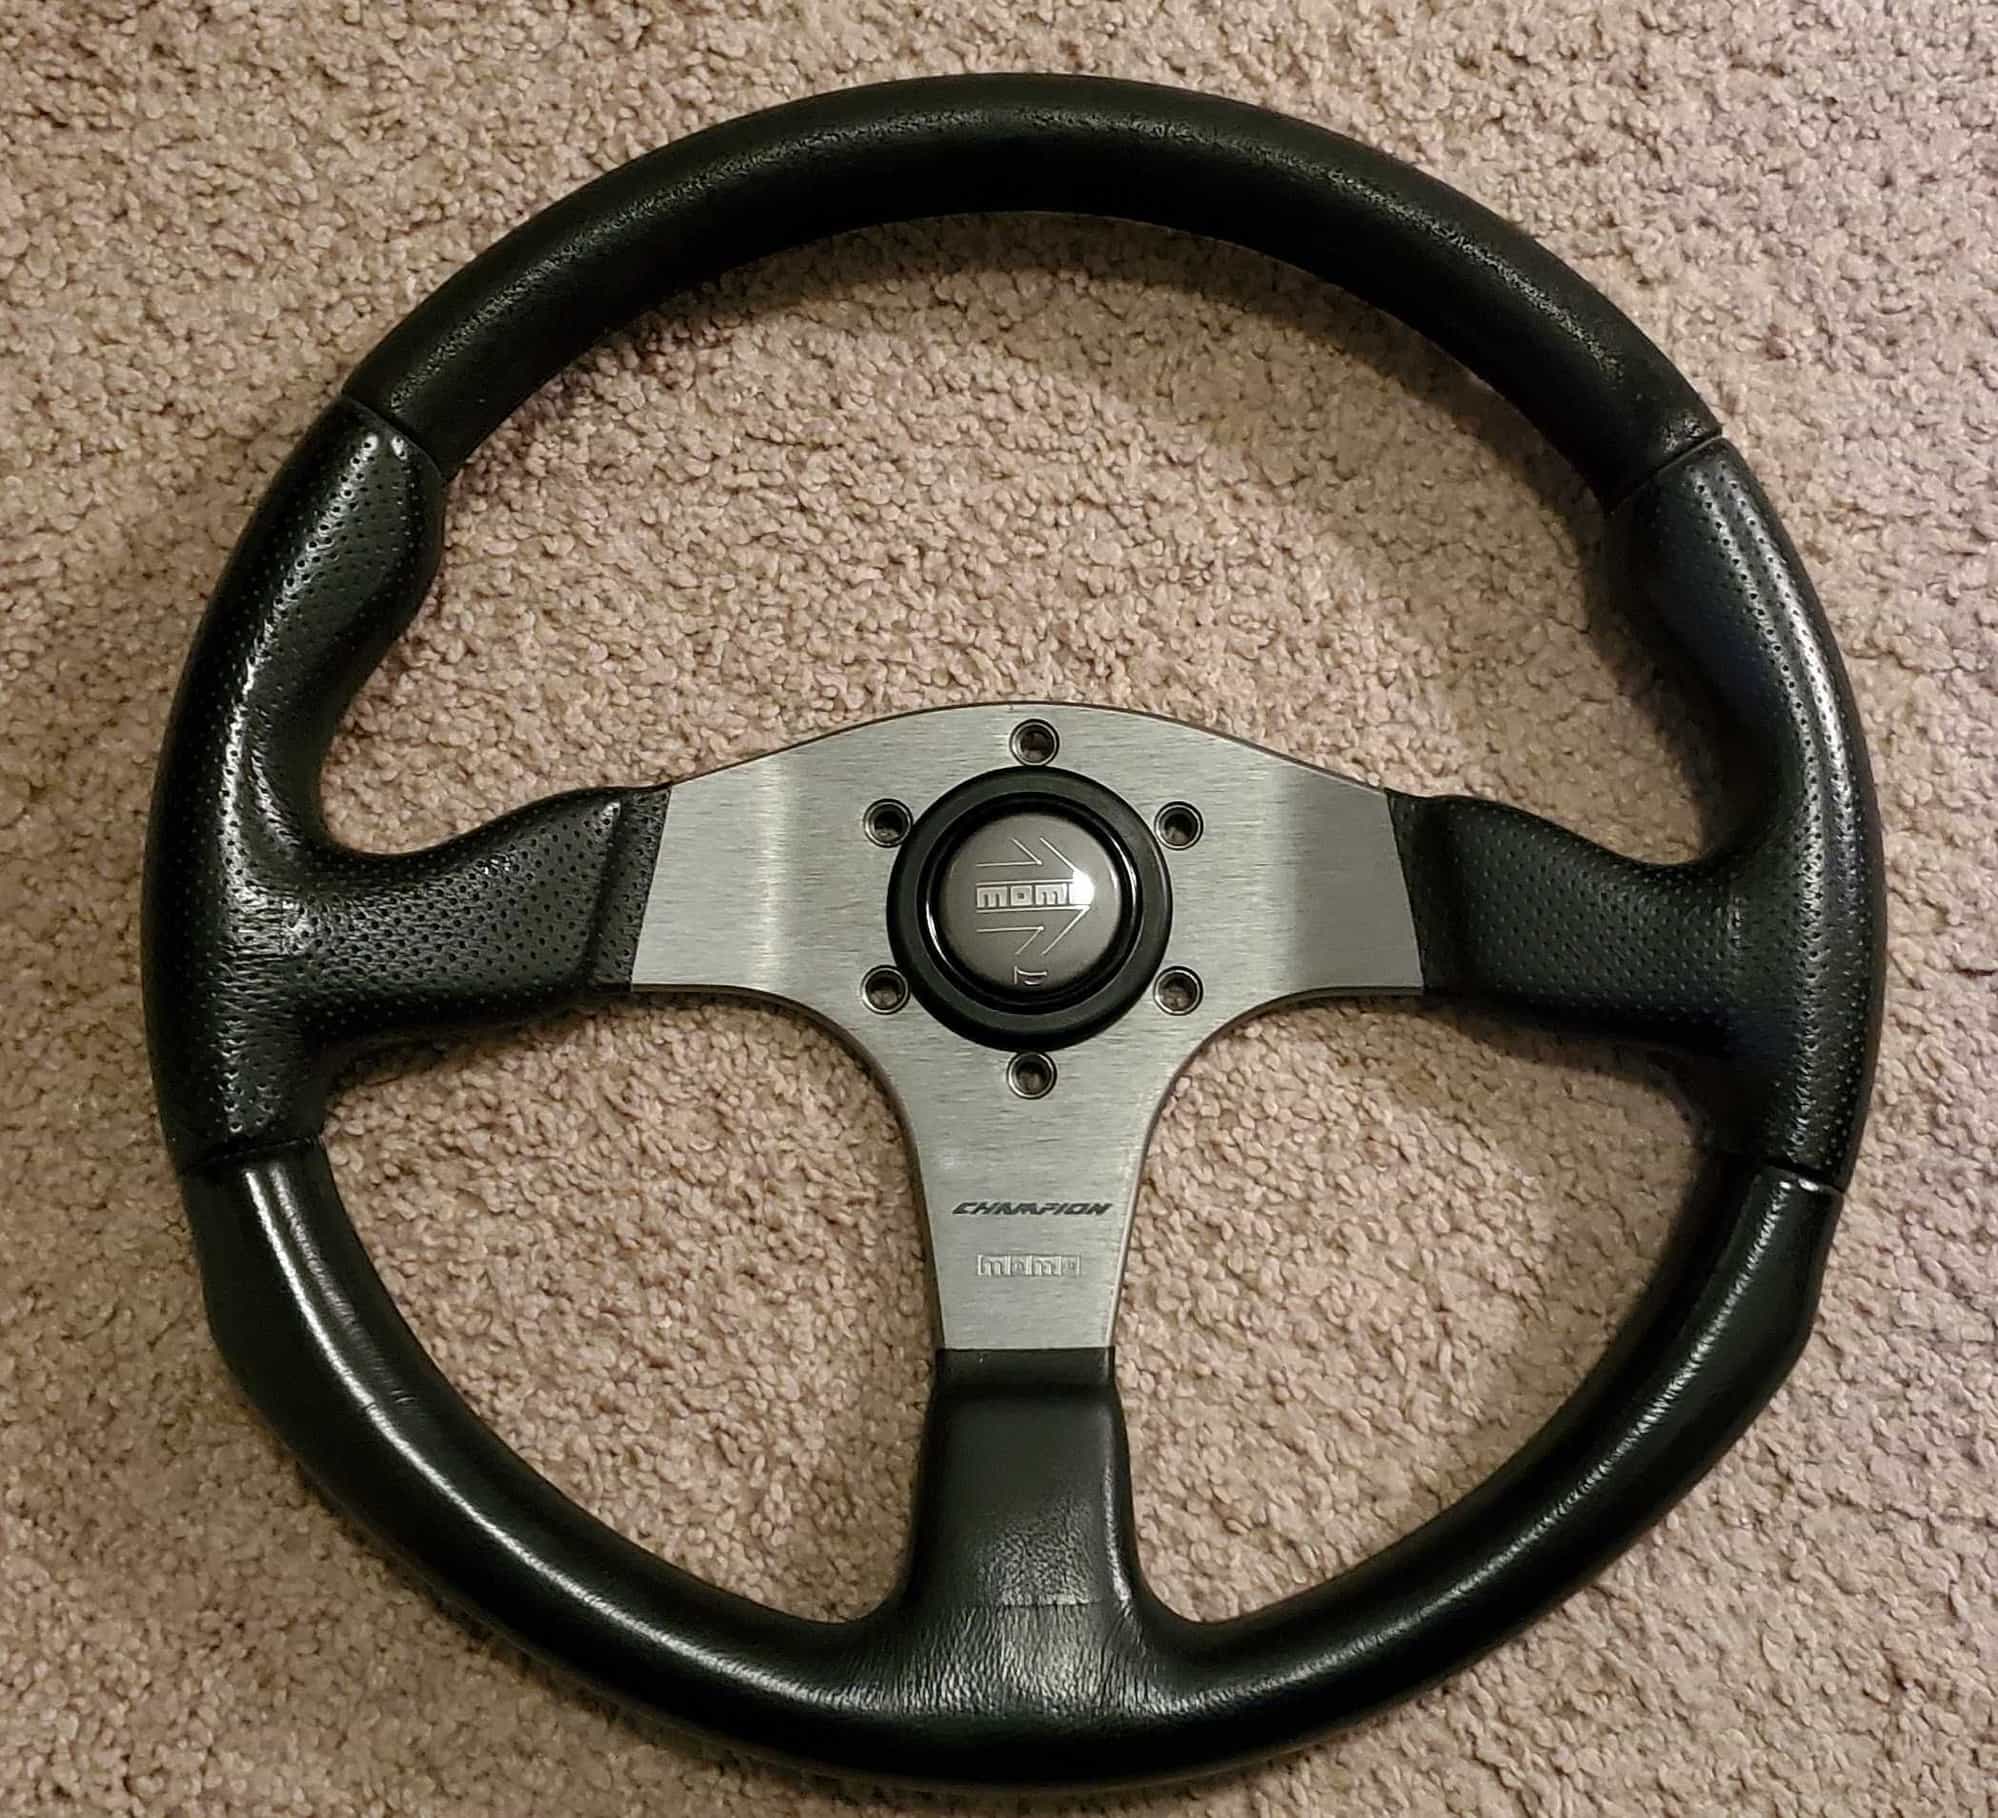 Interior/Upholstery - MOMO Champion Steering Wheel, widefoot pedal extender, A/C compressor and lines - Used - All Years Any Make All Models - Austin, TX 78610, United States